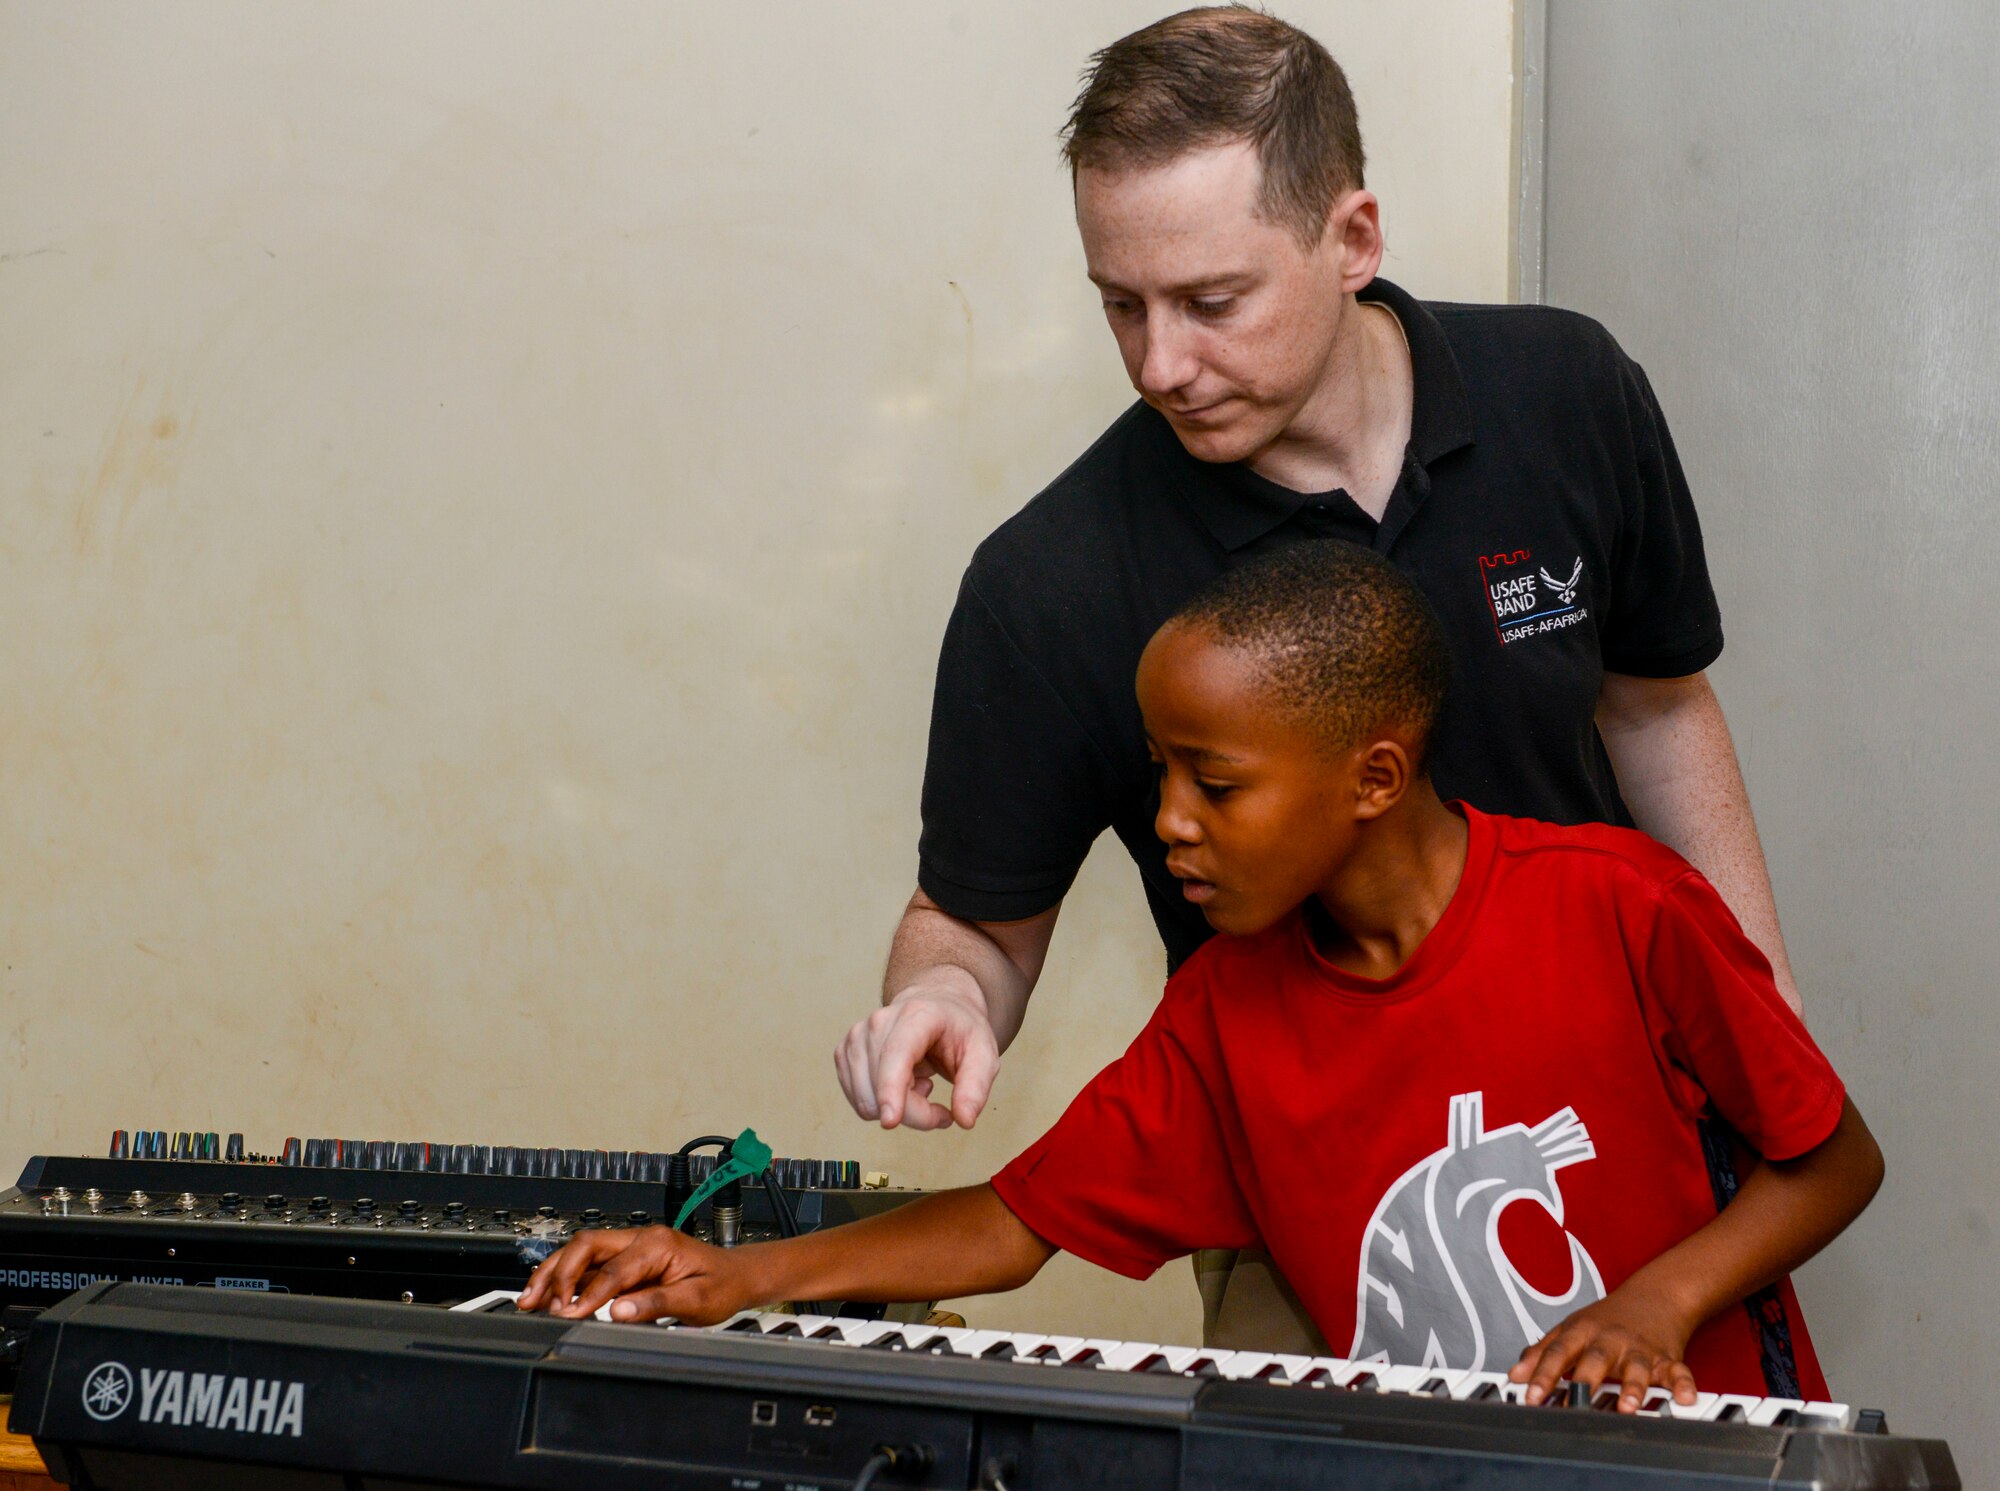 U.S. Air Force Staff Sgt. Justin Cockerham, U.S. Air Forces in Europe Band pianist, helps a student with find the right notes on a keyboard at the Gisimba Memorial Centre in Kigali, Rwanda, March 6, 2019. As musical ambassadors, members of the band can reach audiences that traditional military members can't. They travel the world to build cultural bridges, and honor and preserve cultural heritage. (U.S. Air Force photo by Tech. Sgt. Timothy Moore)